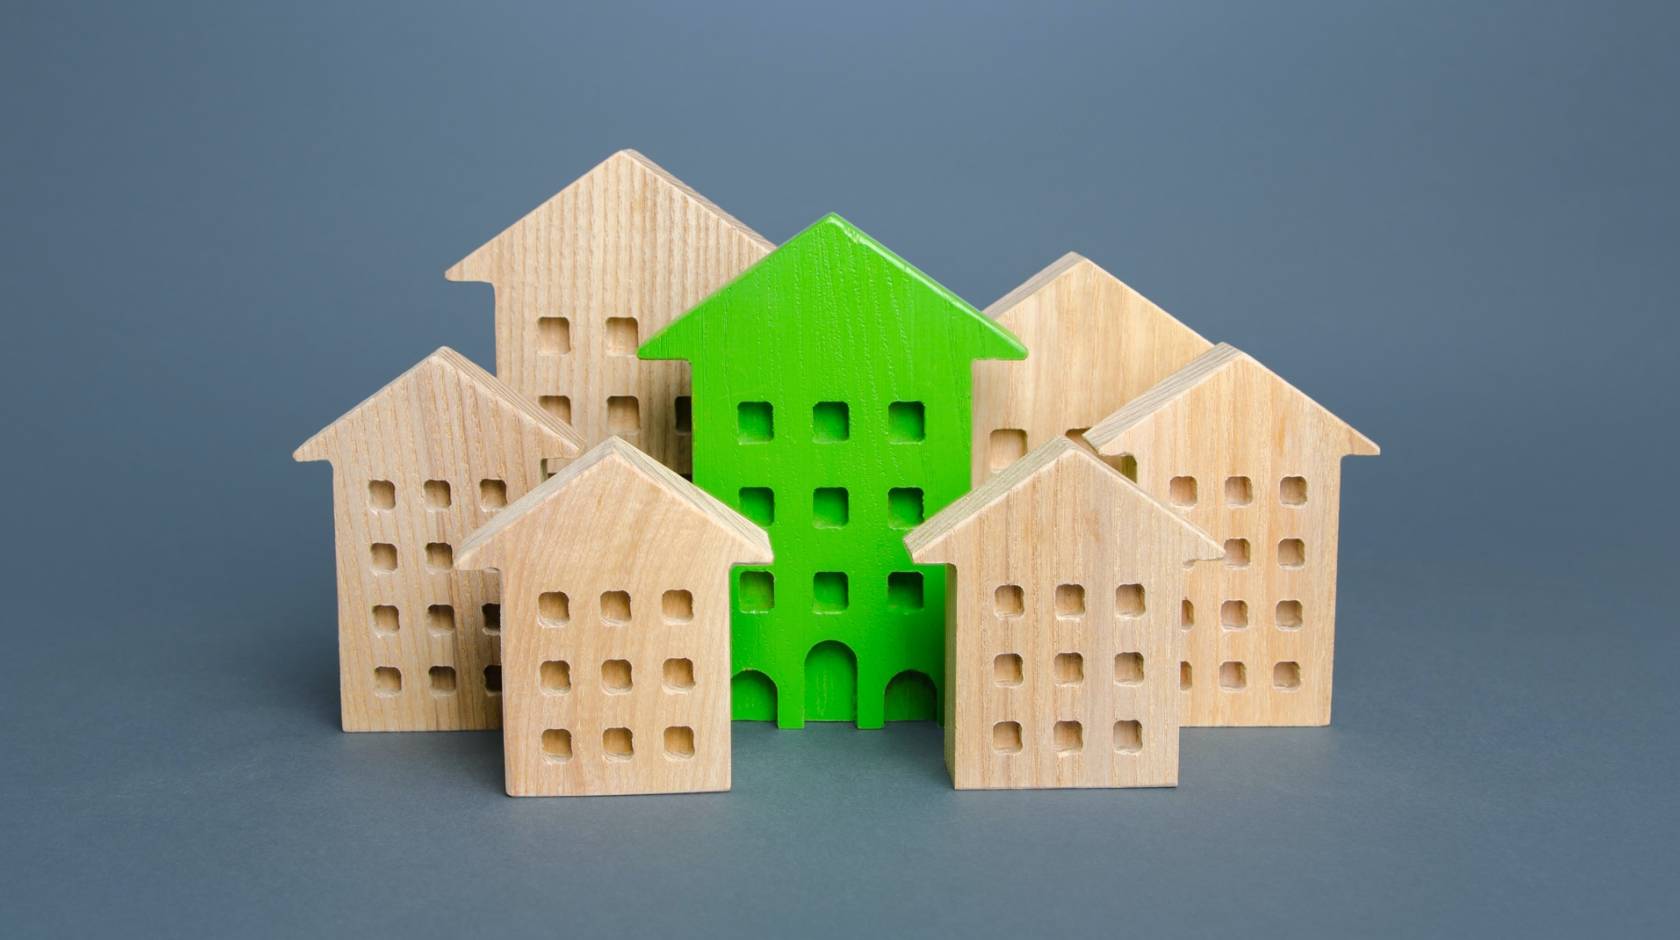 Simple wooden blocks look like buildings with a green-colored one in the middle